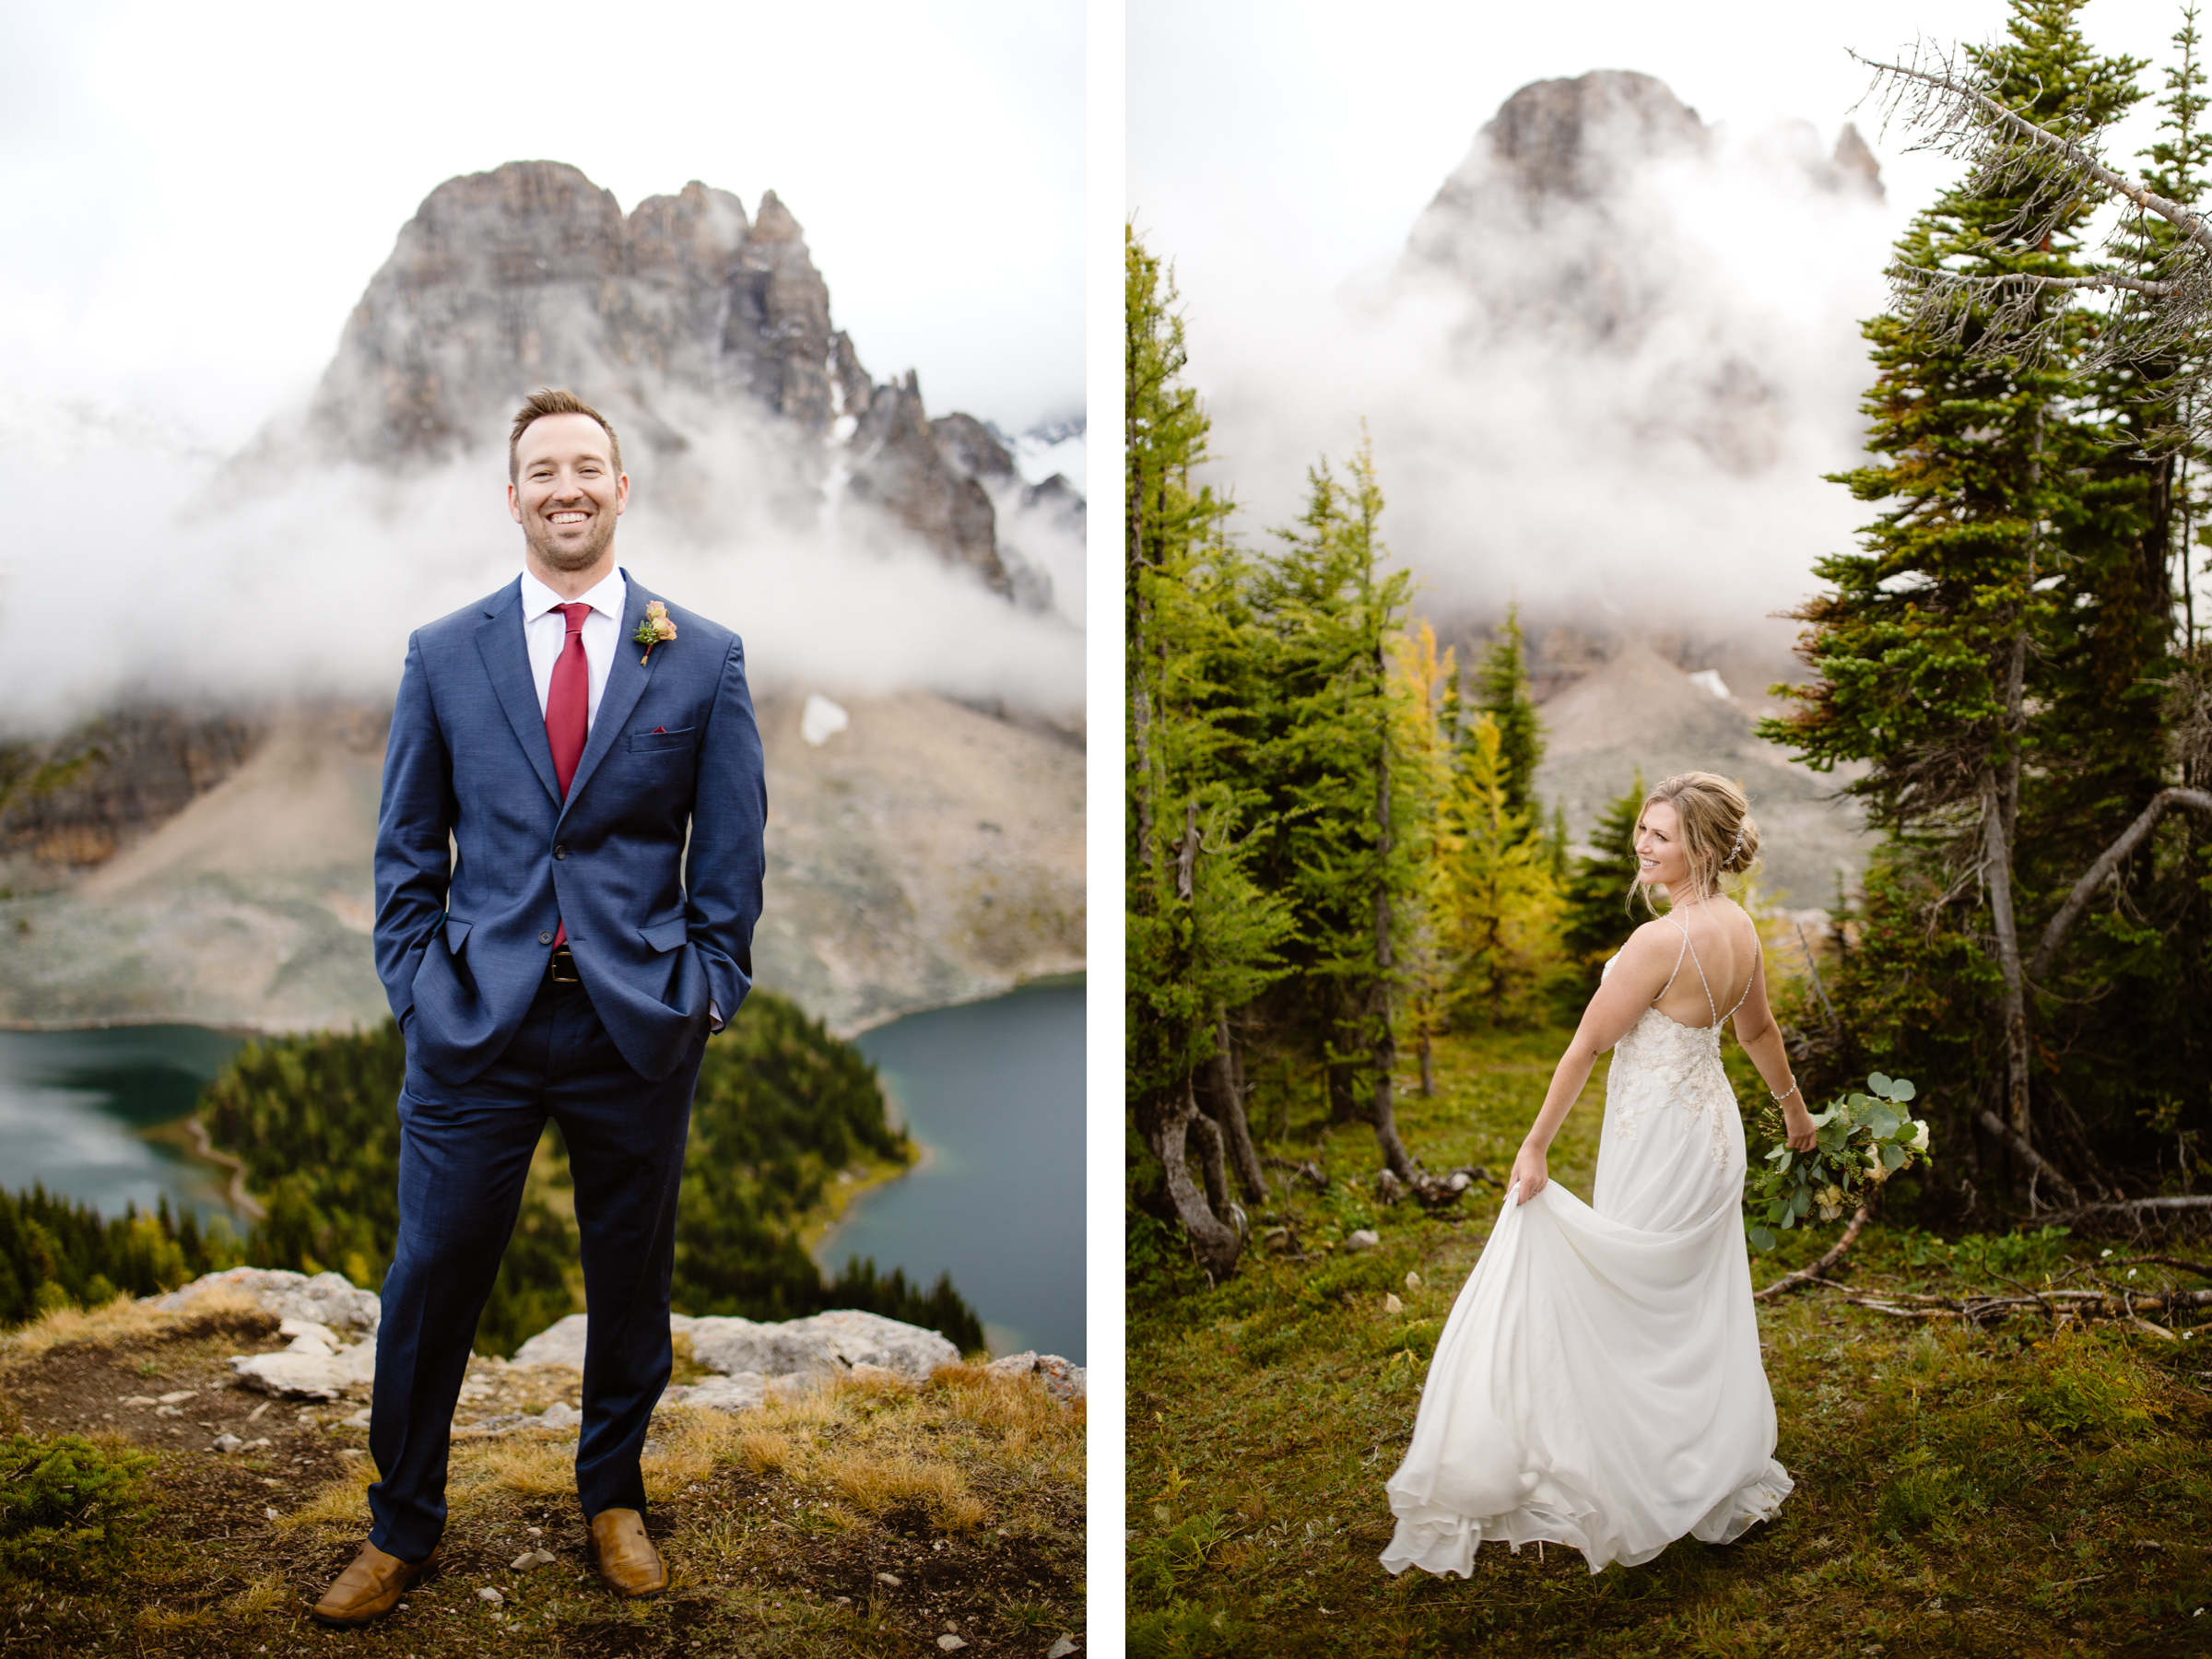 Mount Assiniboine Elopement Photographers at a Backcountry Lodge - Photo 29